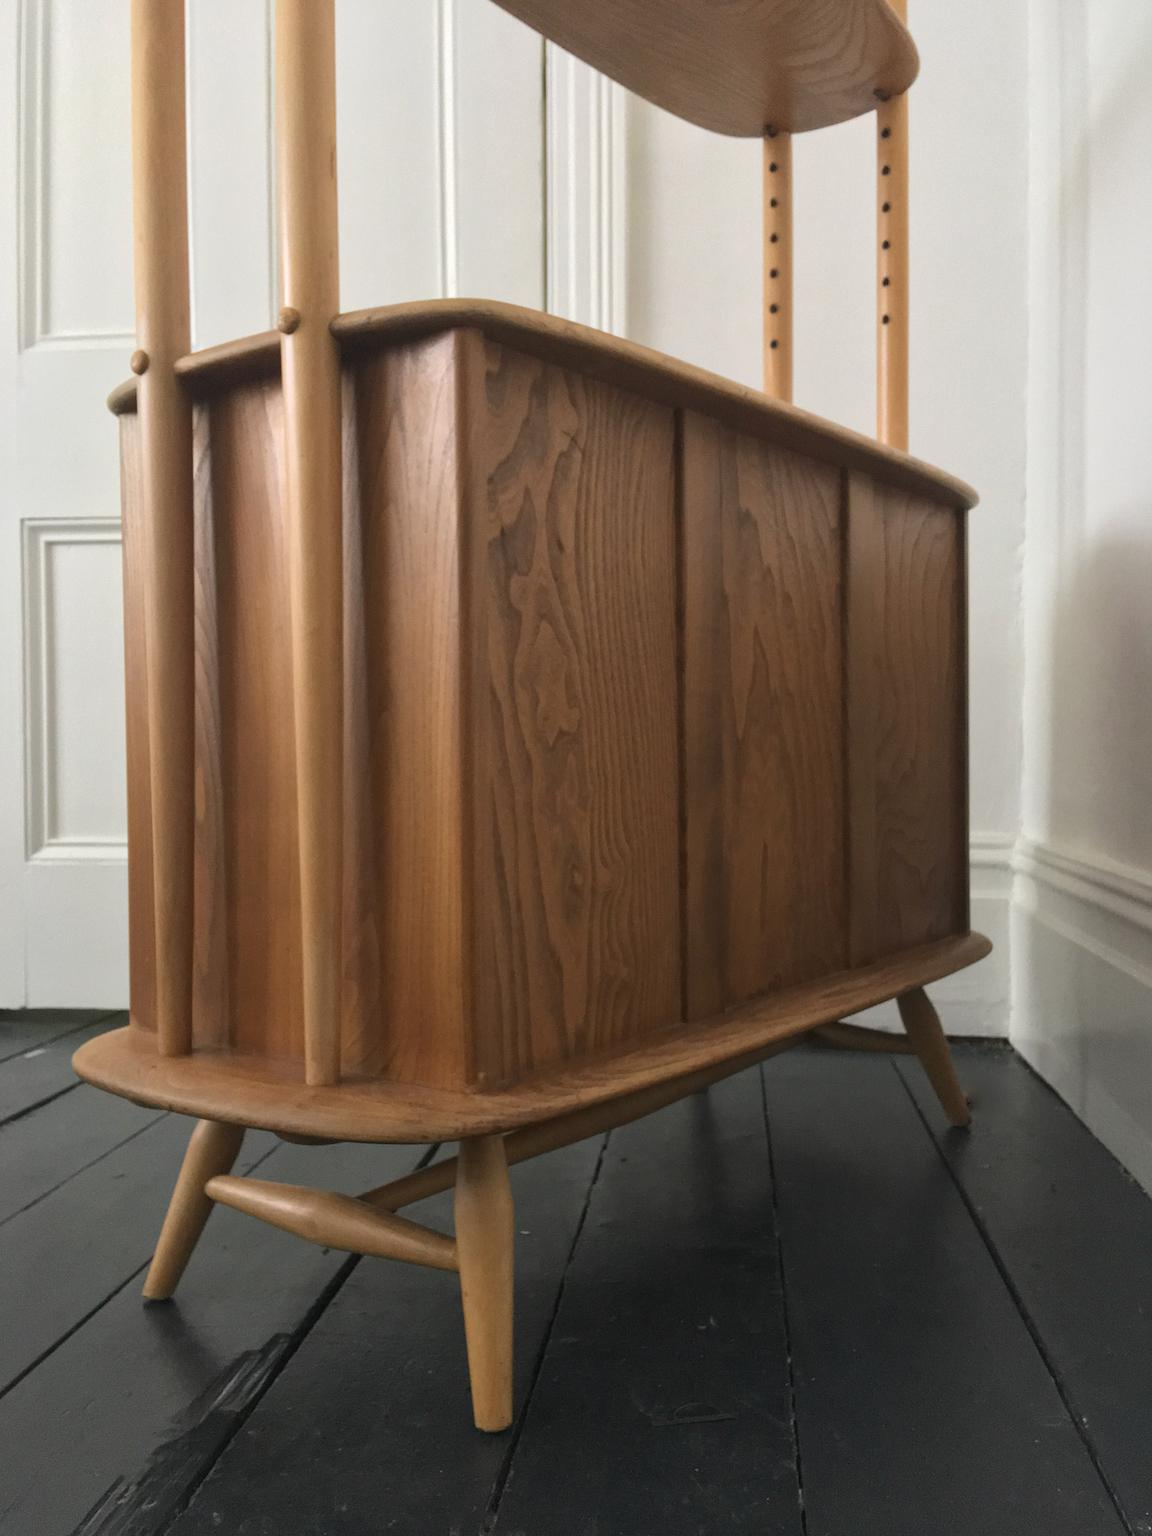 20th Century Original Midcentury Room Divider or Bookcase in Elm and Beech by Ercolani